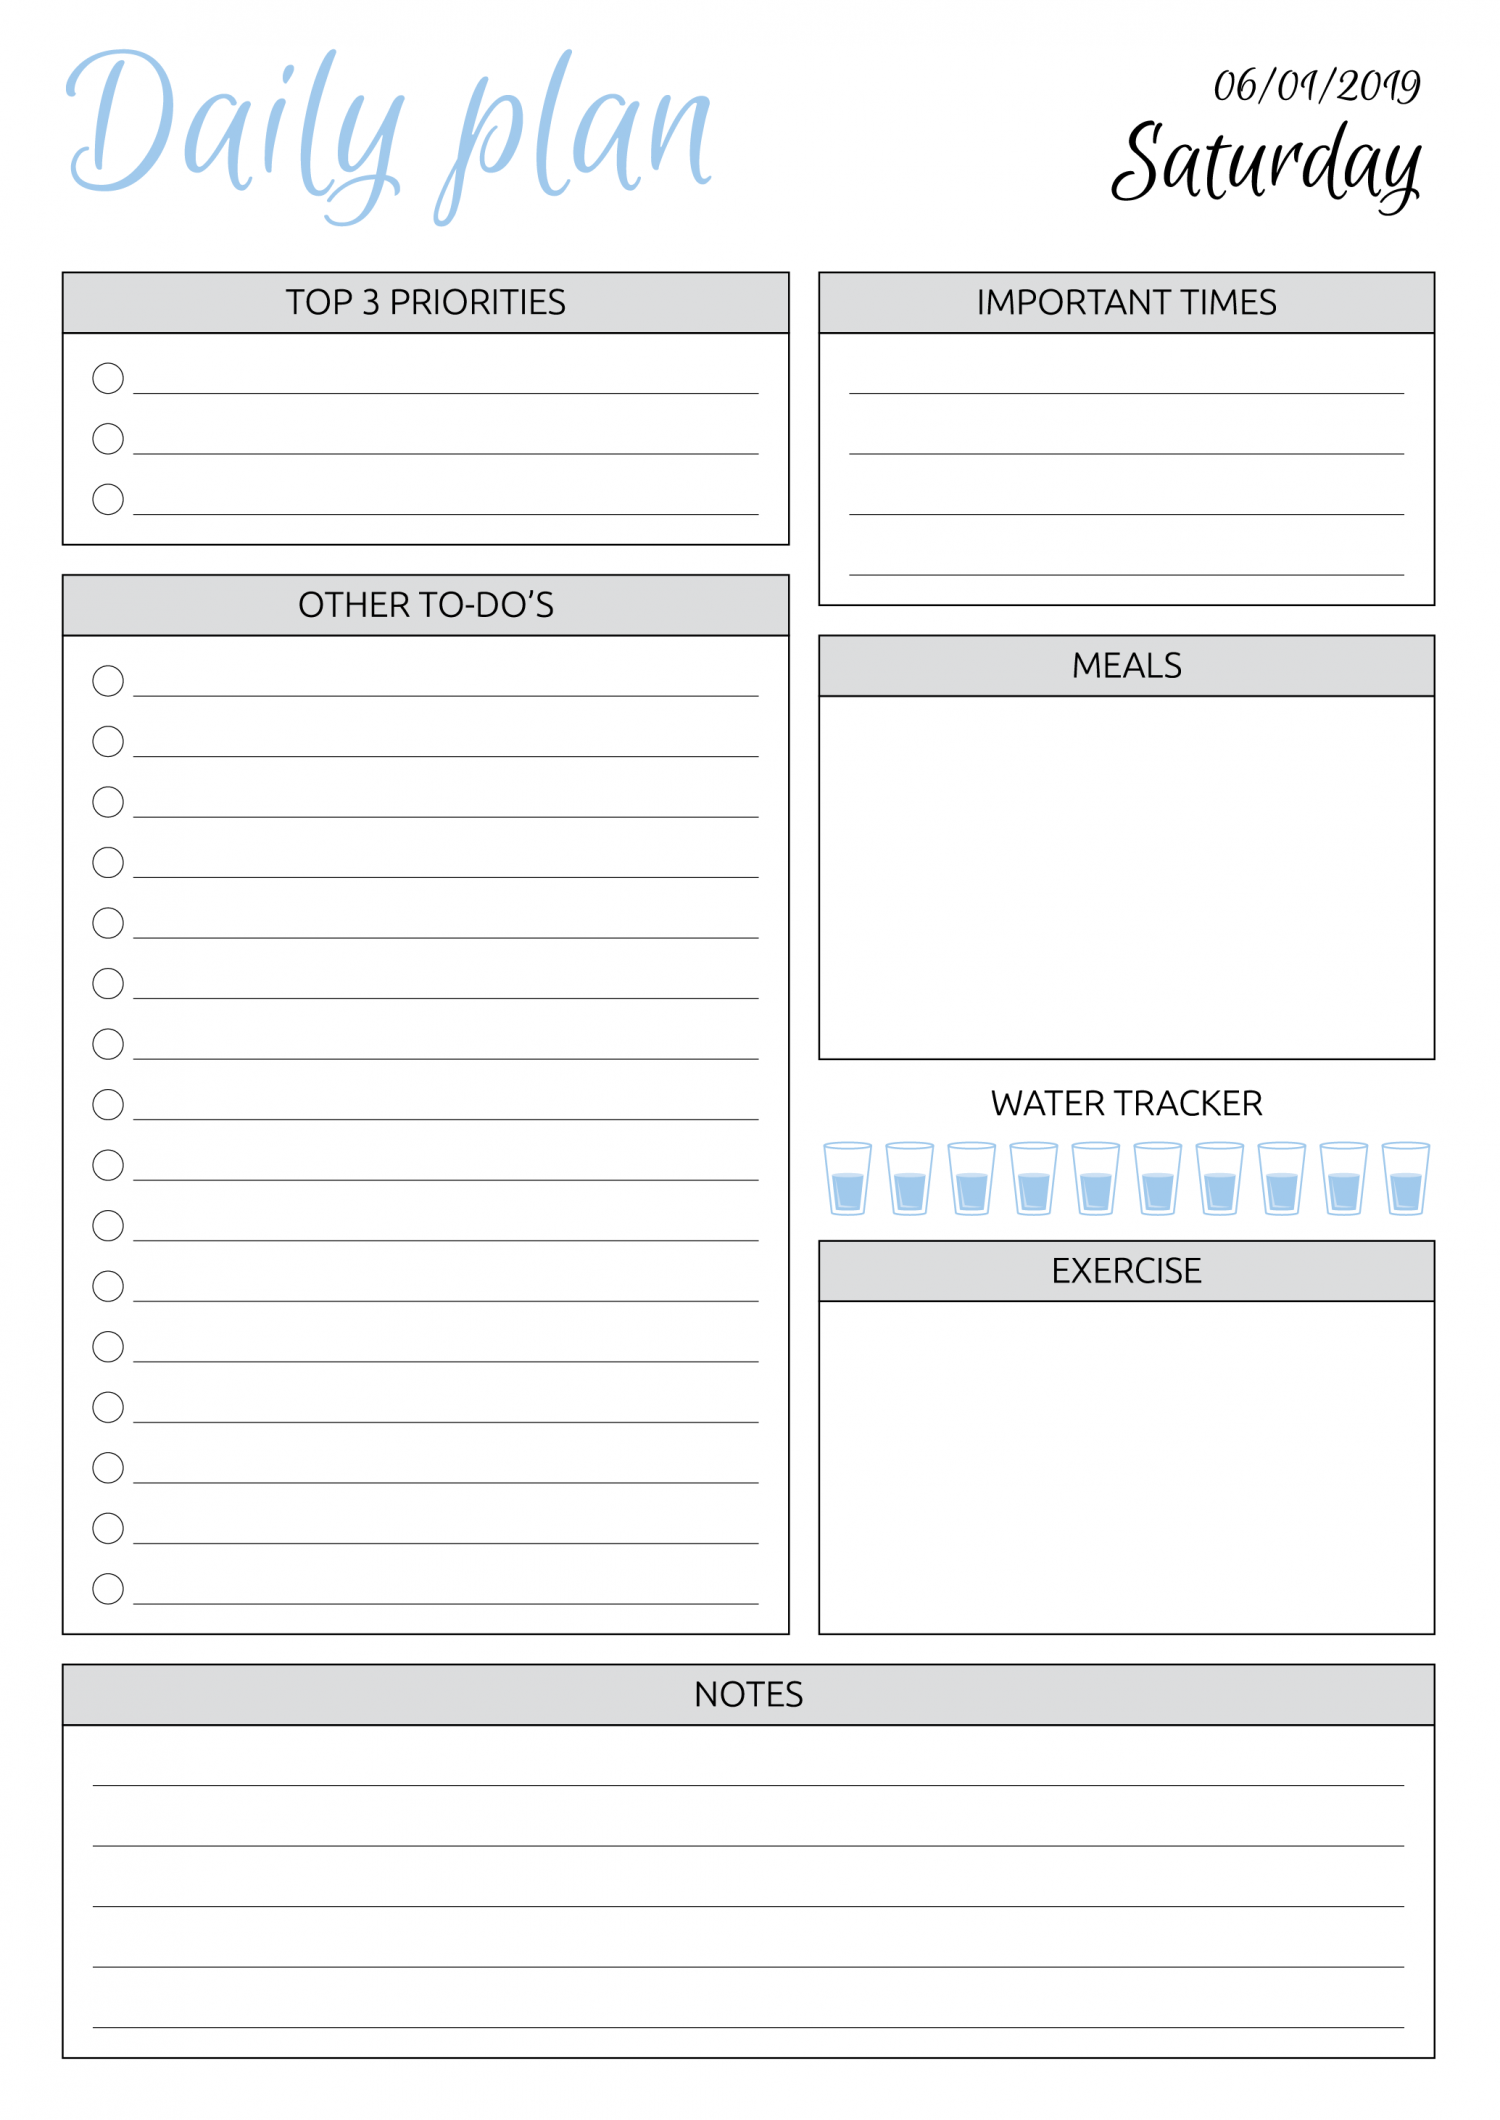 get-it-done-daily-to-do-list-and-free-printable-meredith-rines